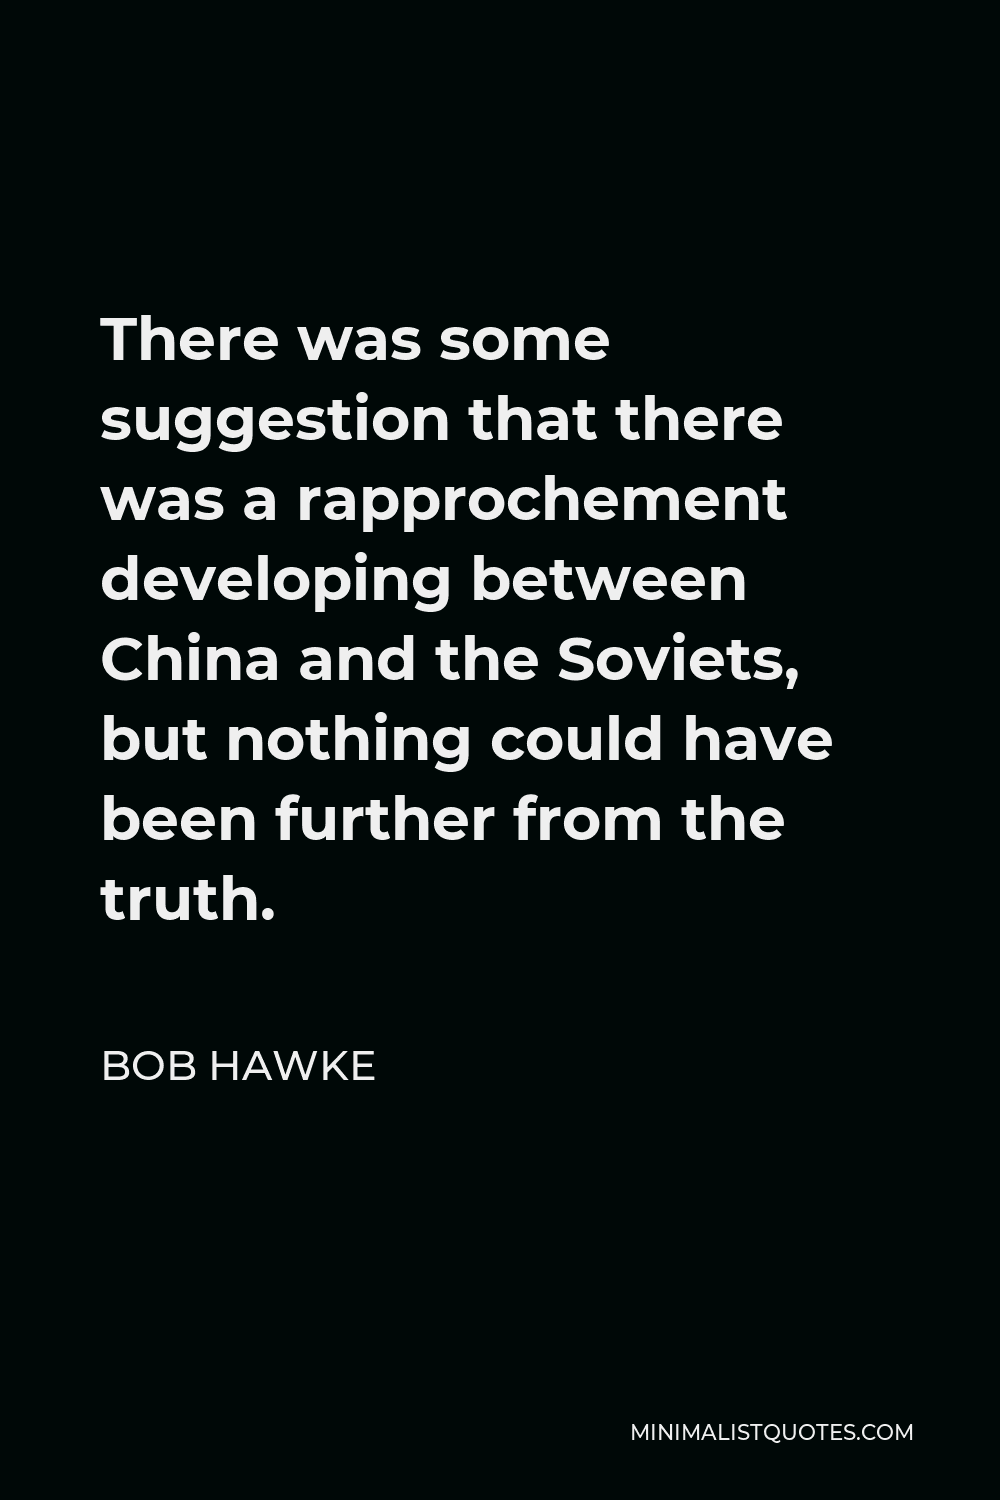 Bob Hawke Quote - There was some suggestion that there was a rapprochement developing between China and the Soviets, but nothing could have been further from the truth.